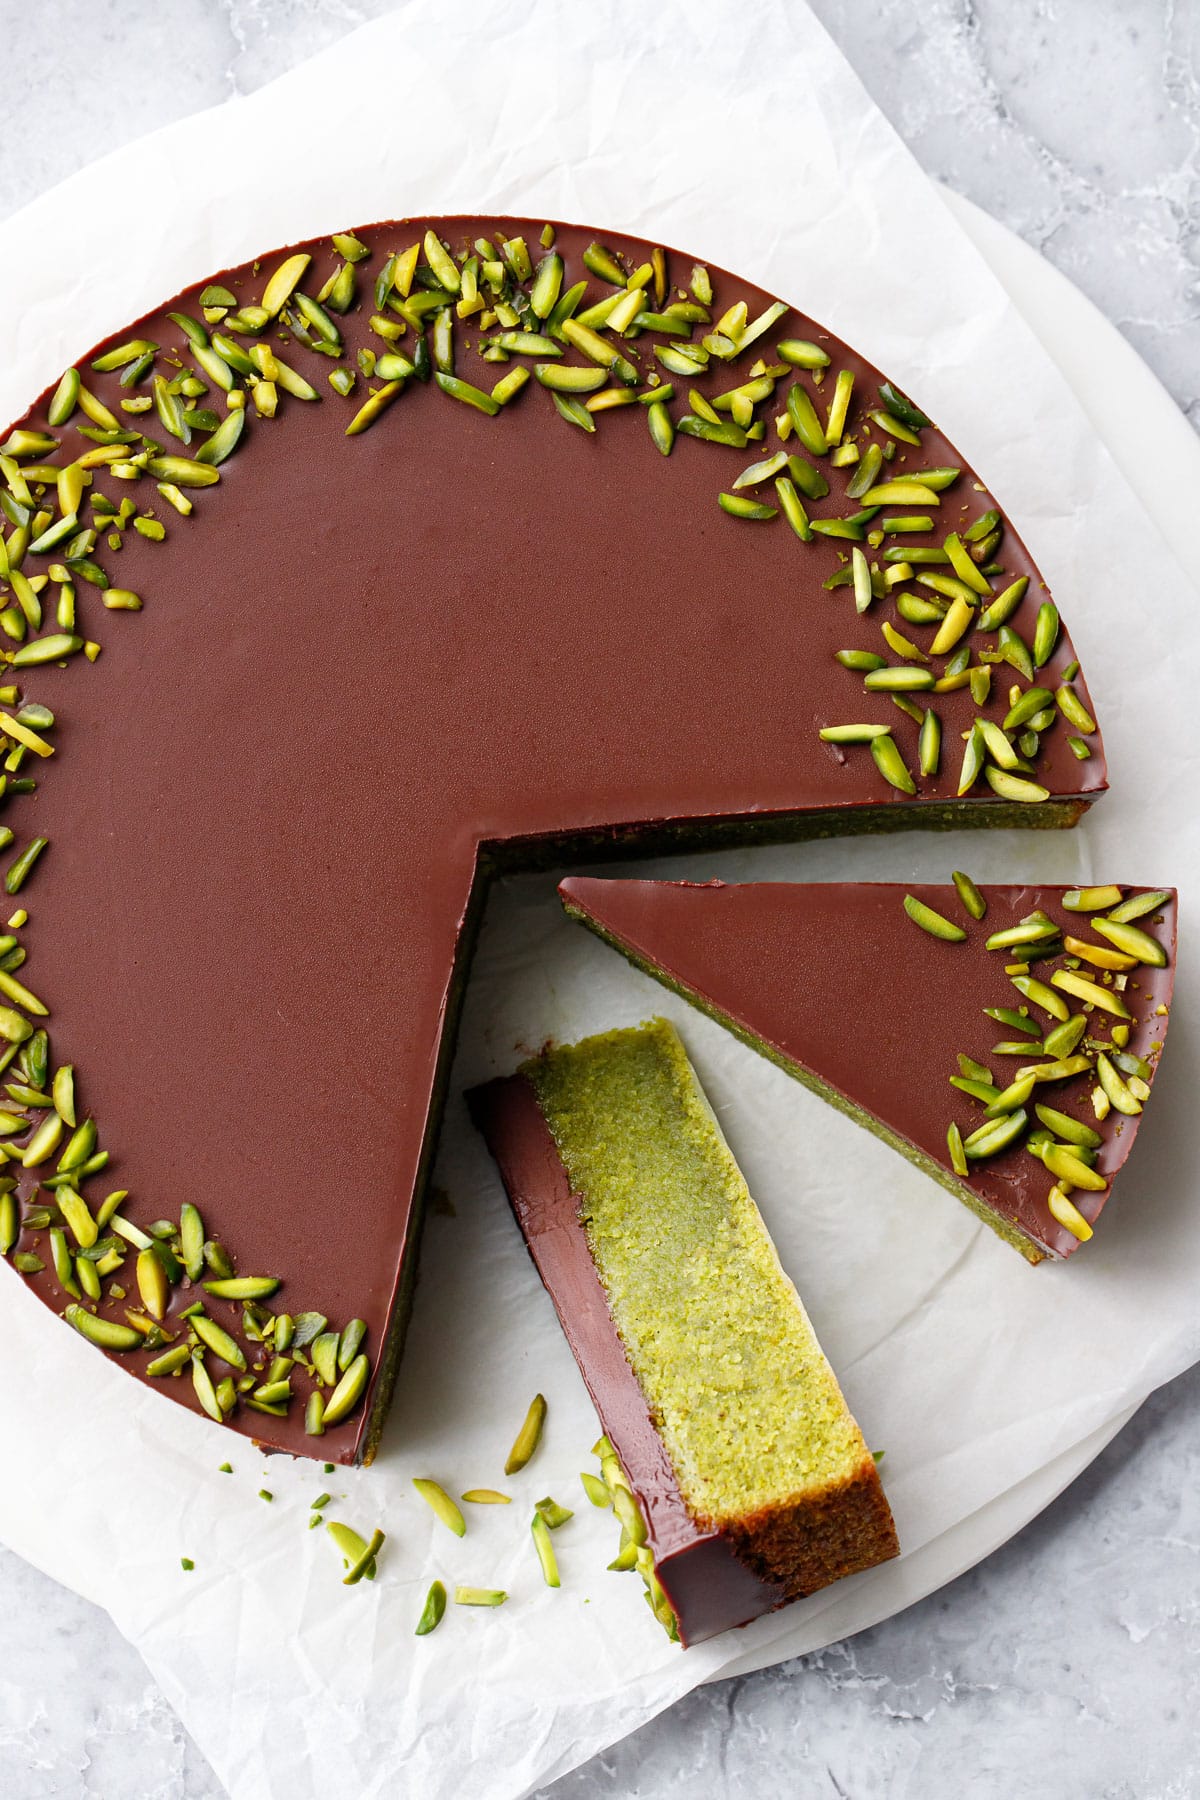 Overhead, two cut slices of Chocolate Ganache-topped Flourless Pistachio Cake, one on its side showing the bright green interior, with a border of slivered pistachios.